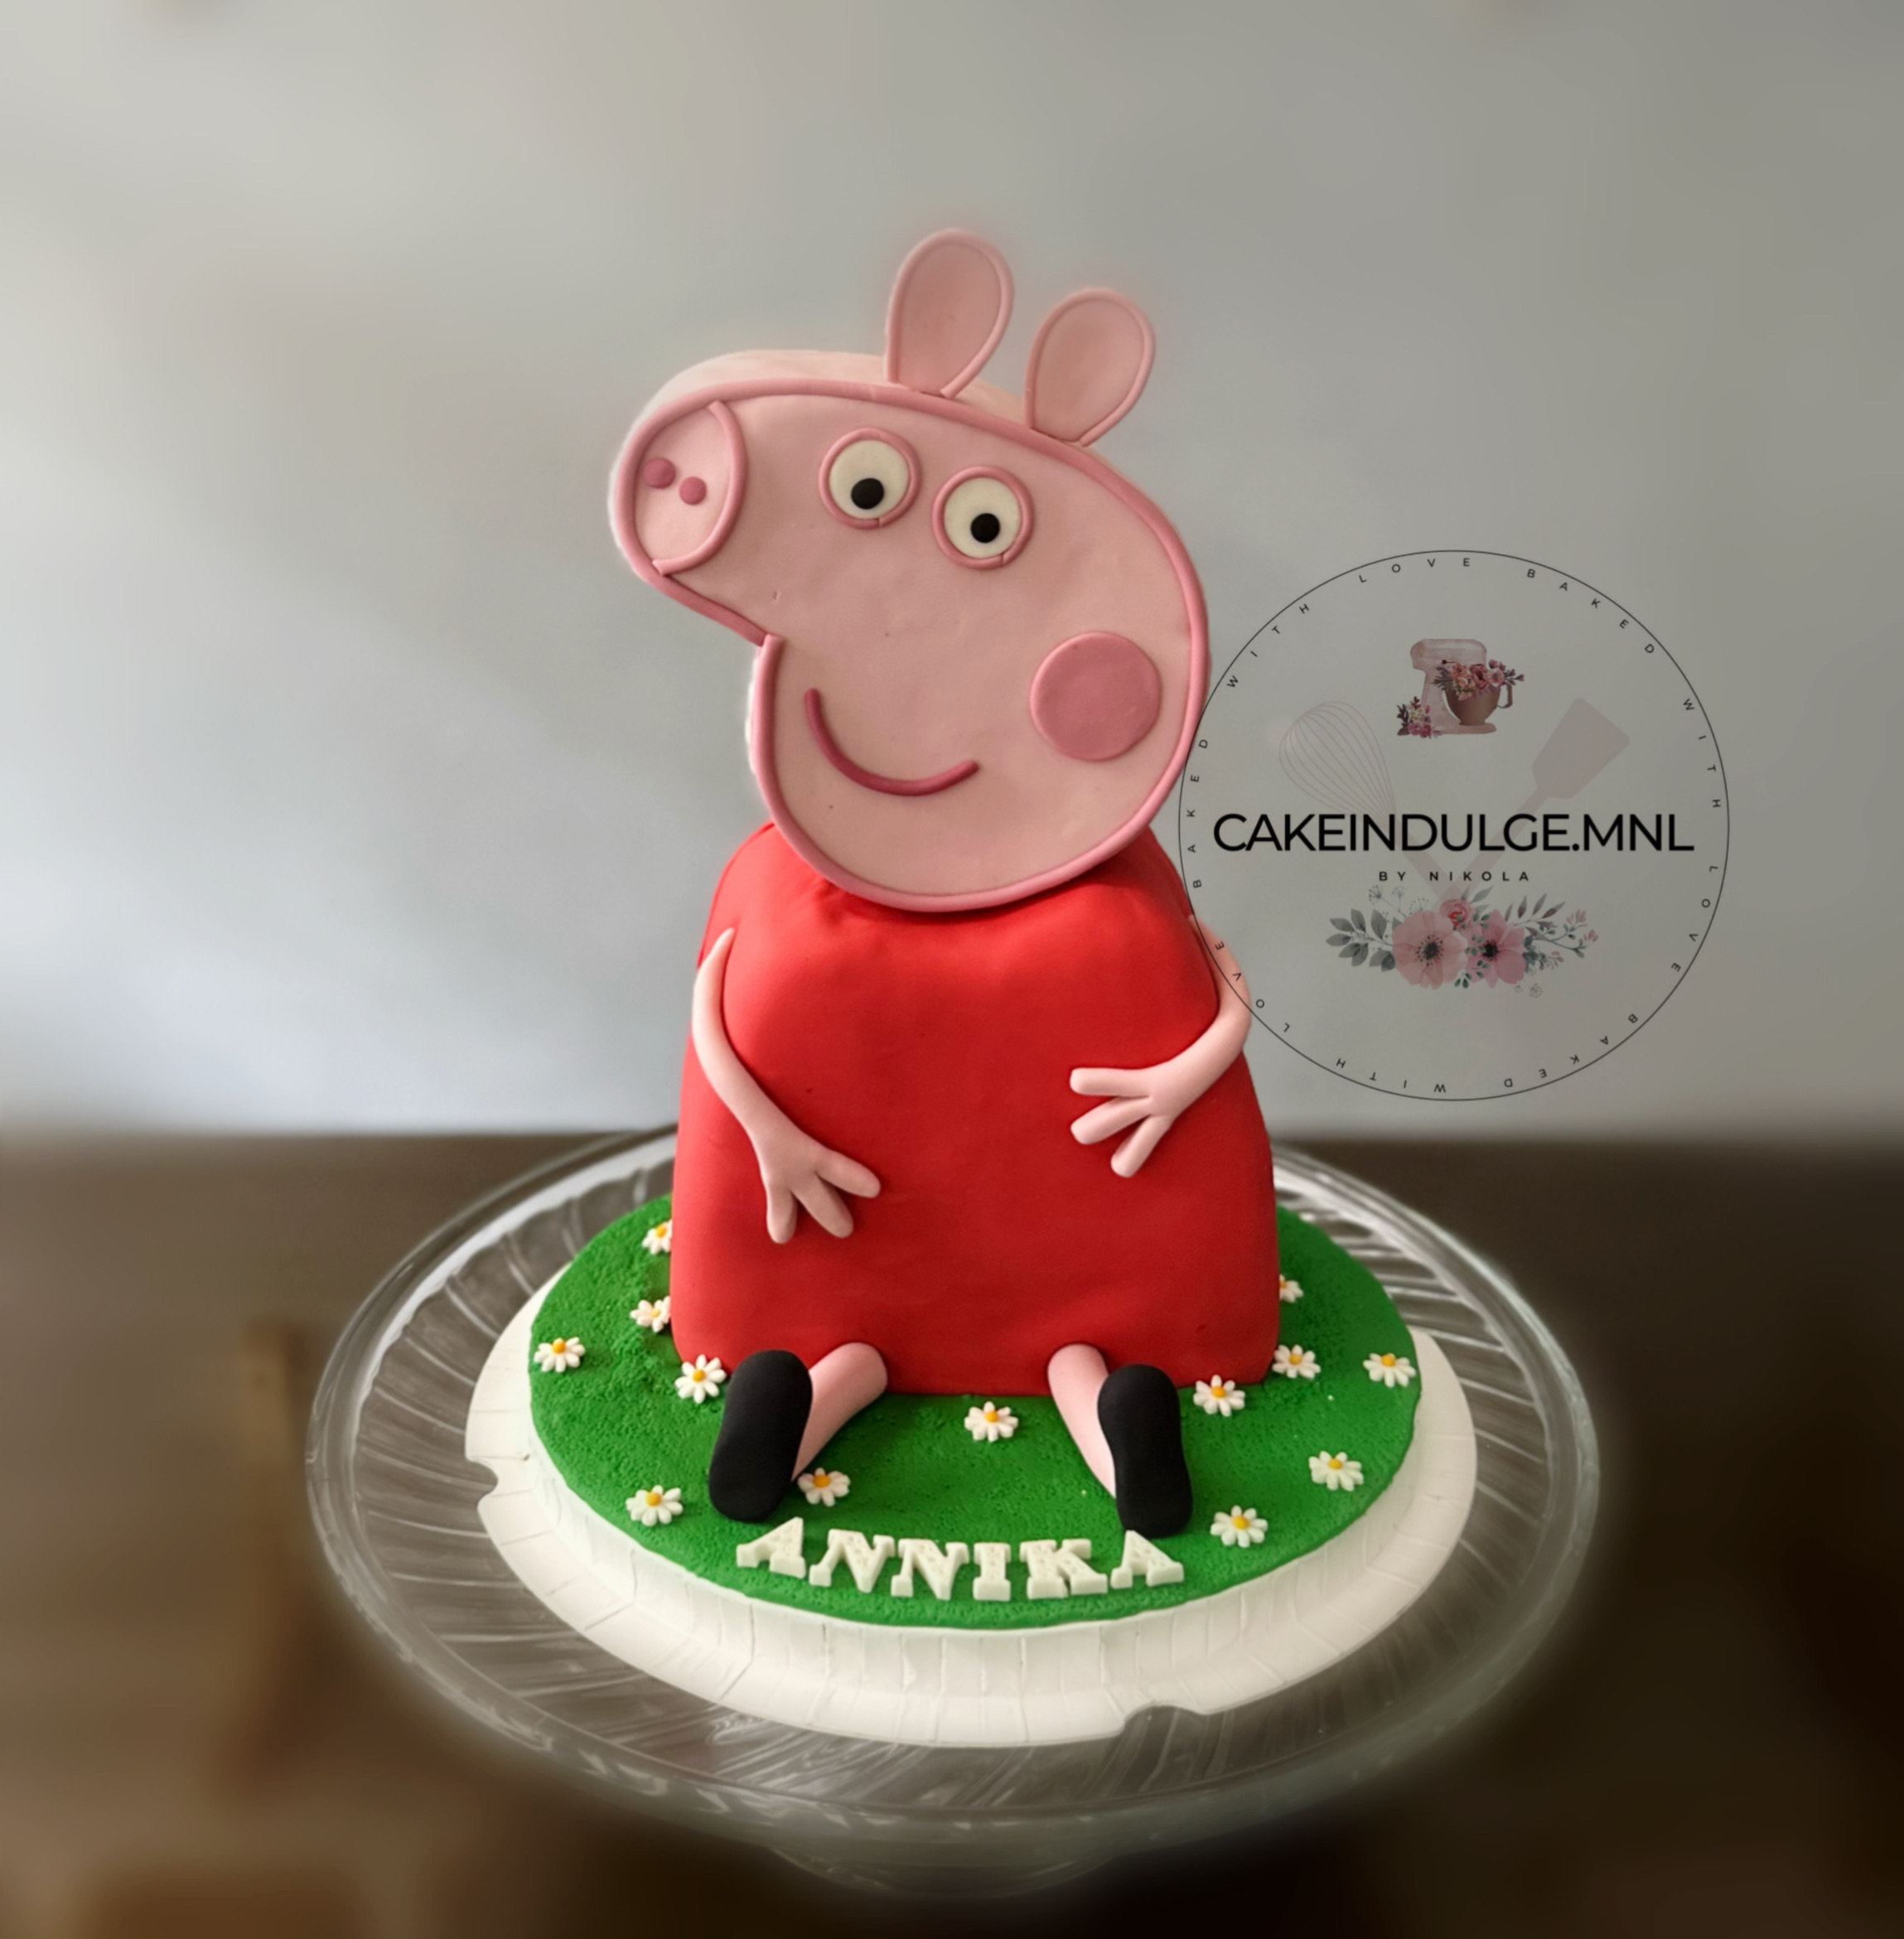 How To Make a Standing Peppa Pig Cake - 3D Peppa Pig Cake - video  Dailymotion